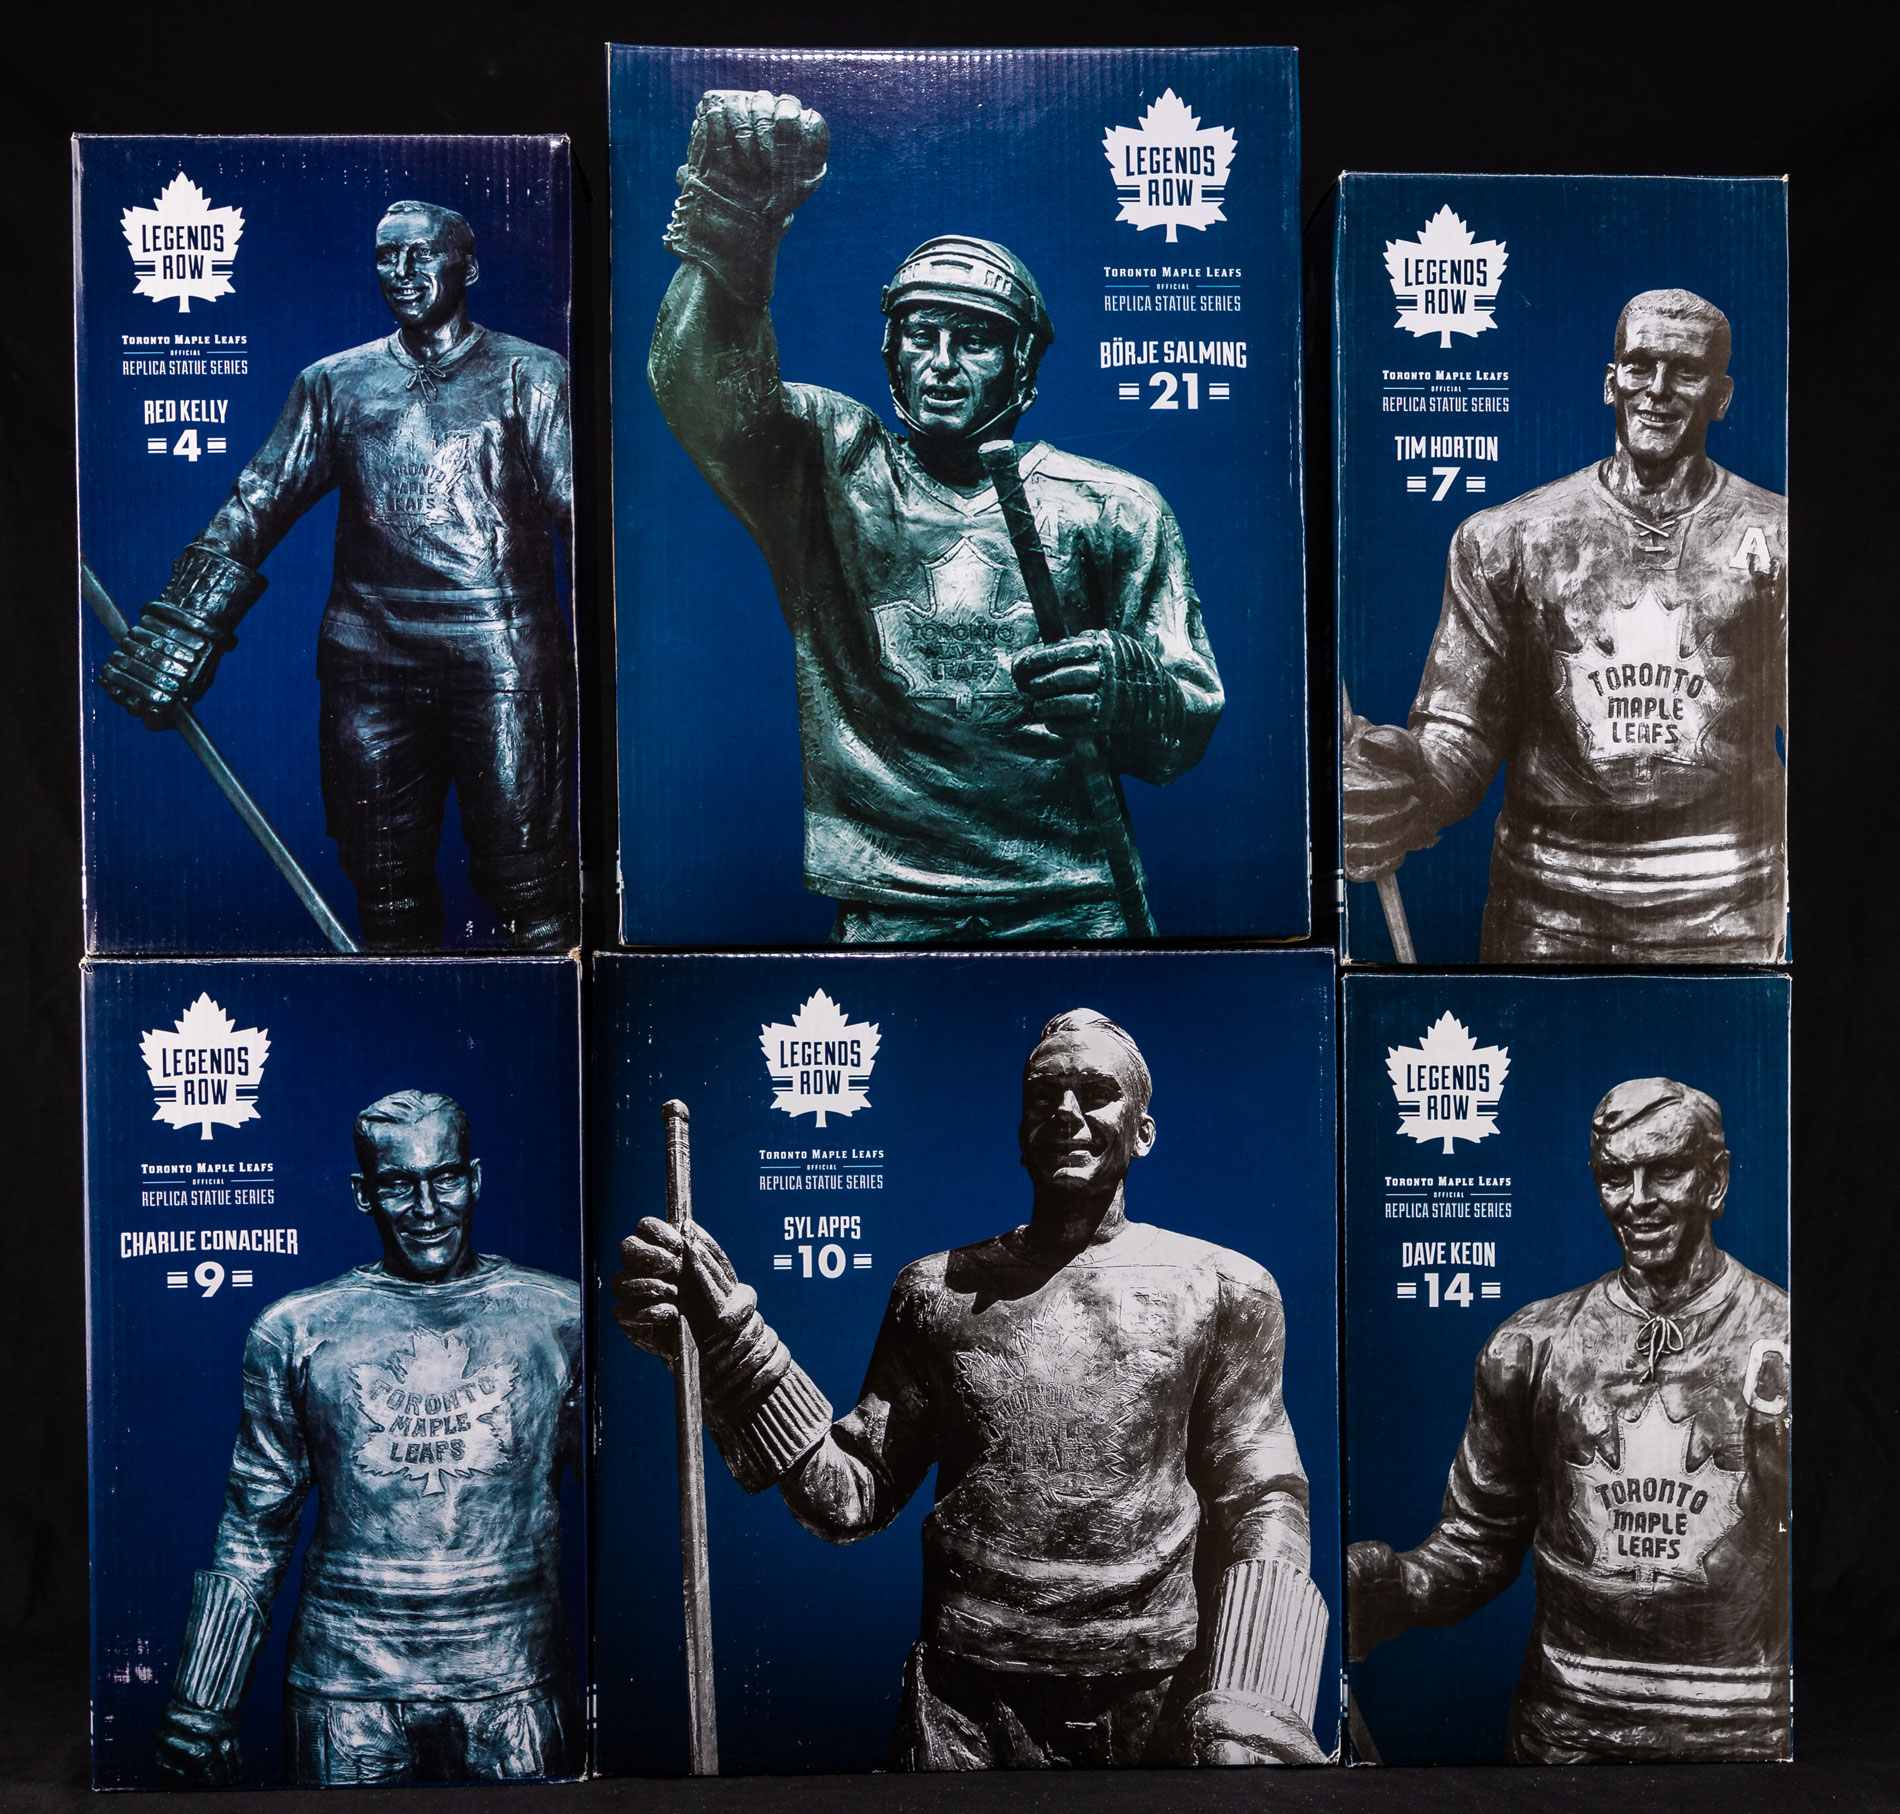 Maple Leafs add Conacher, Kelly, Mahovlich and Clark to Legends